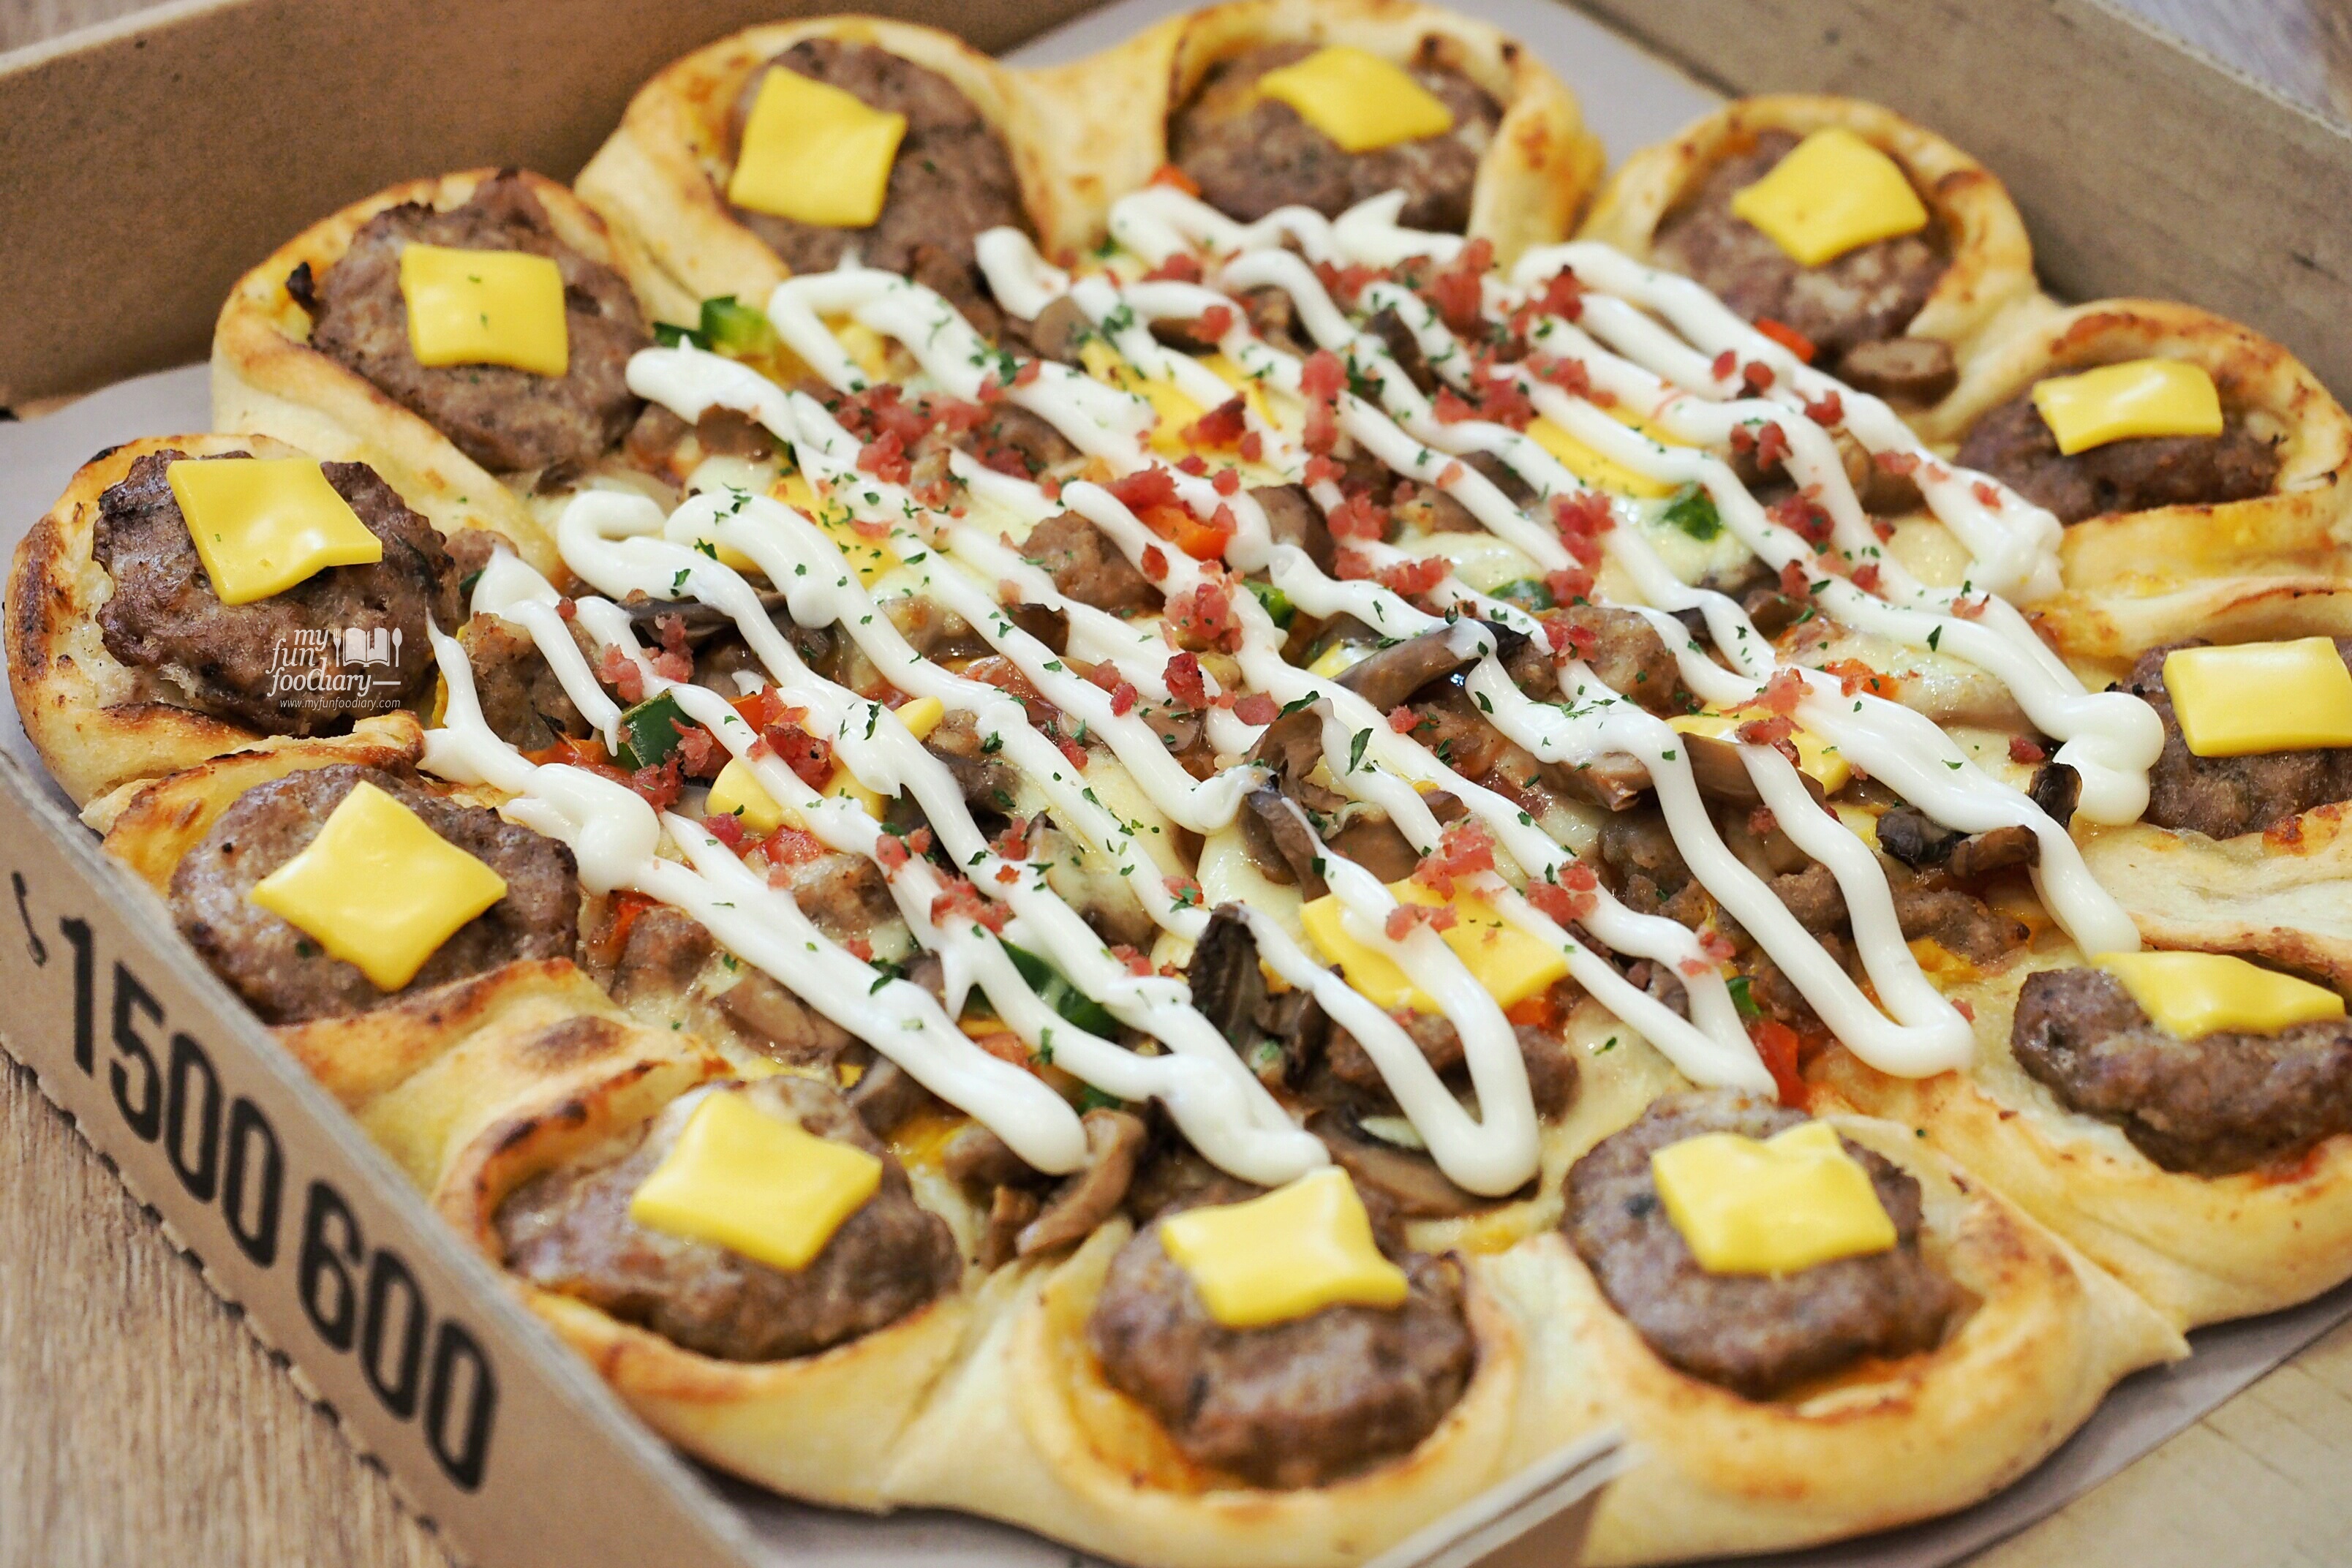 Cheese Burger Pizza at PHD Indonesia by Myfunfoodiary